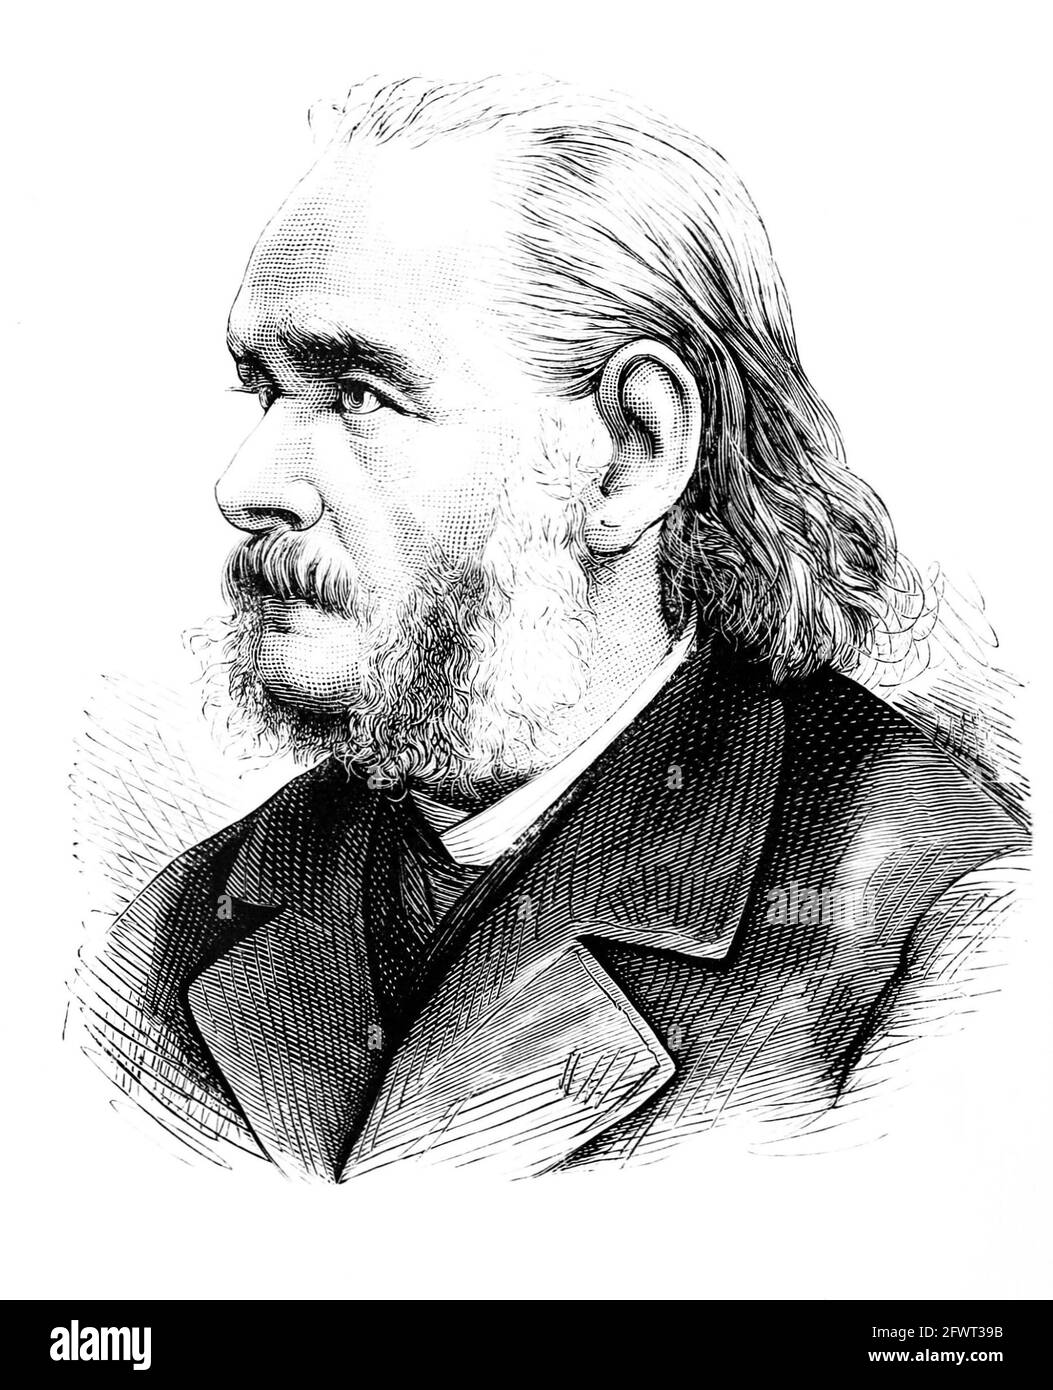 MATTHIAS JAKOB SCHLEIDEN (1804-1881) German botanist and co-founder of cell theory, about 1880 Stock Photo